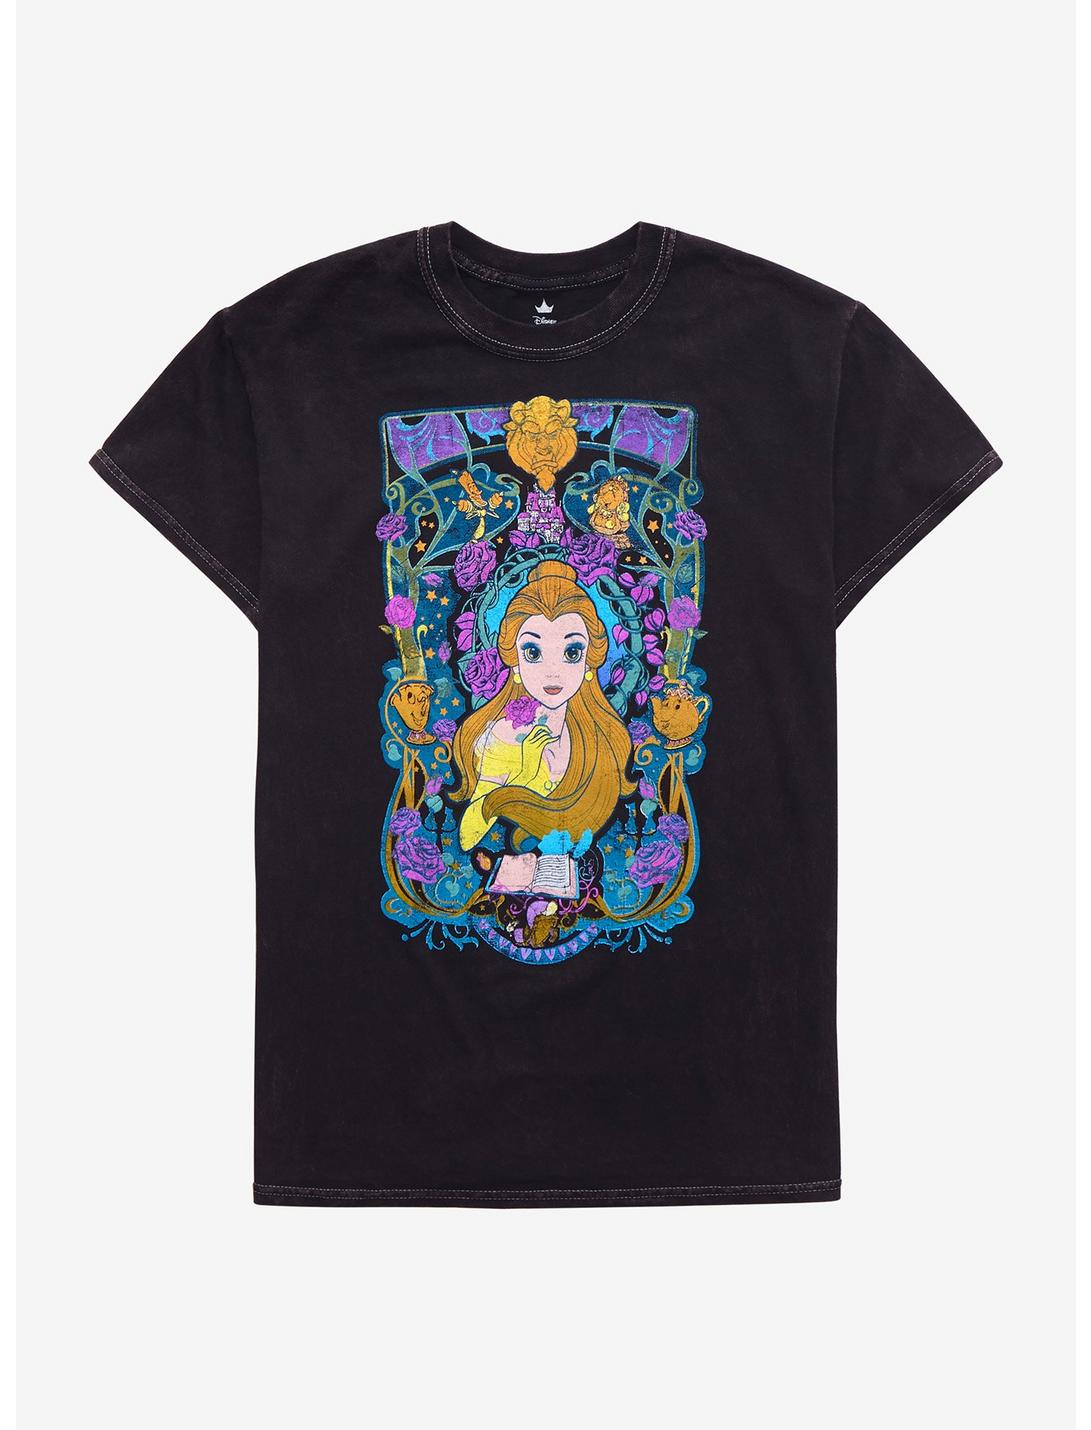 Disney Beauty And The Beast Belle Stained Glass Boyfriend Fit Girls T-Shirt, MULTI, hi-res